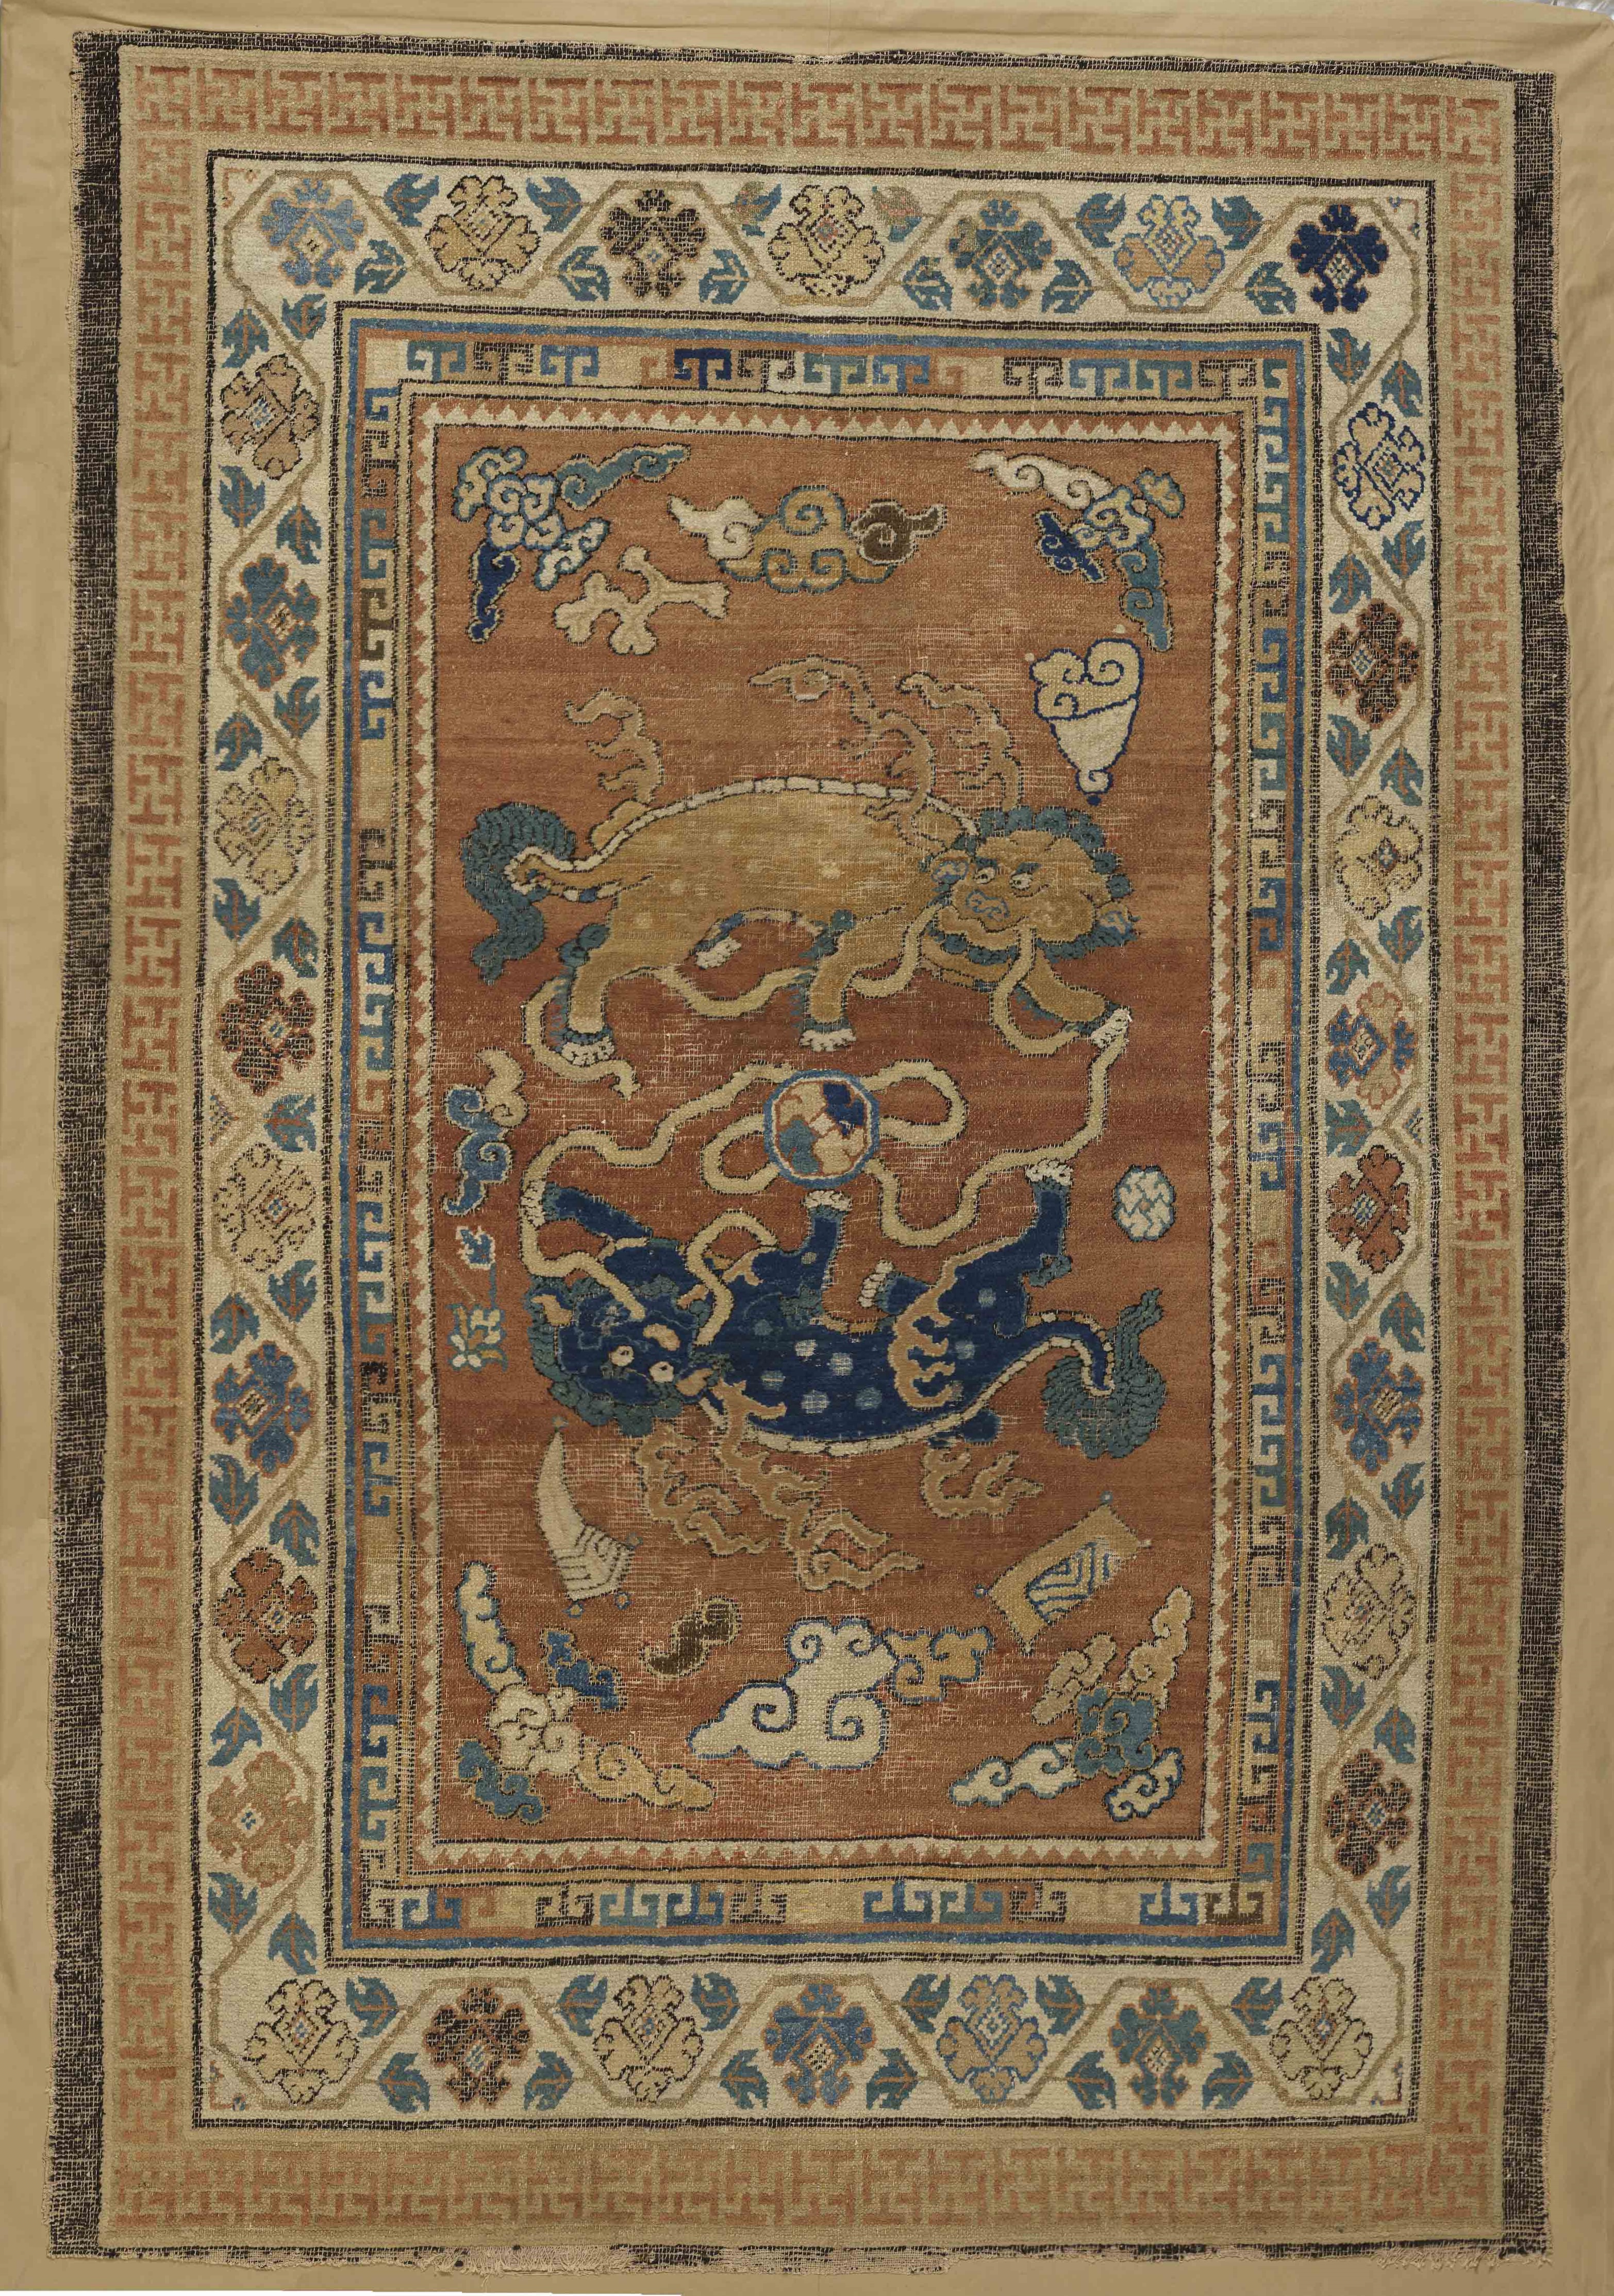 Carpet with “two lions playing with a ball” motif